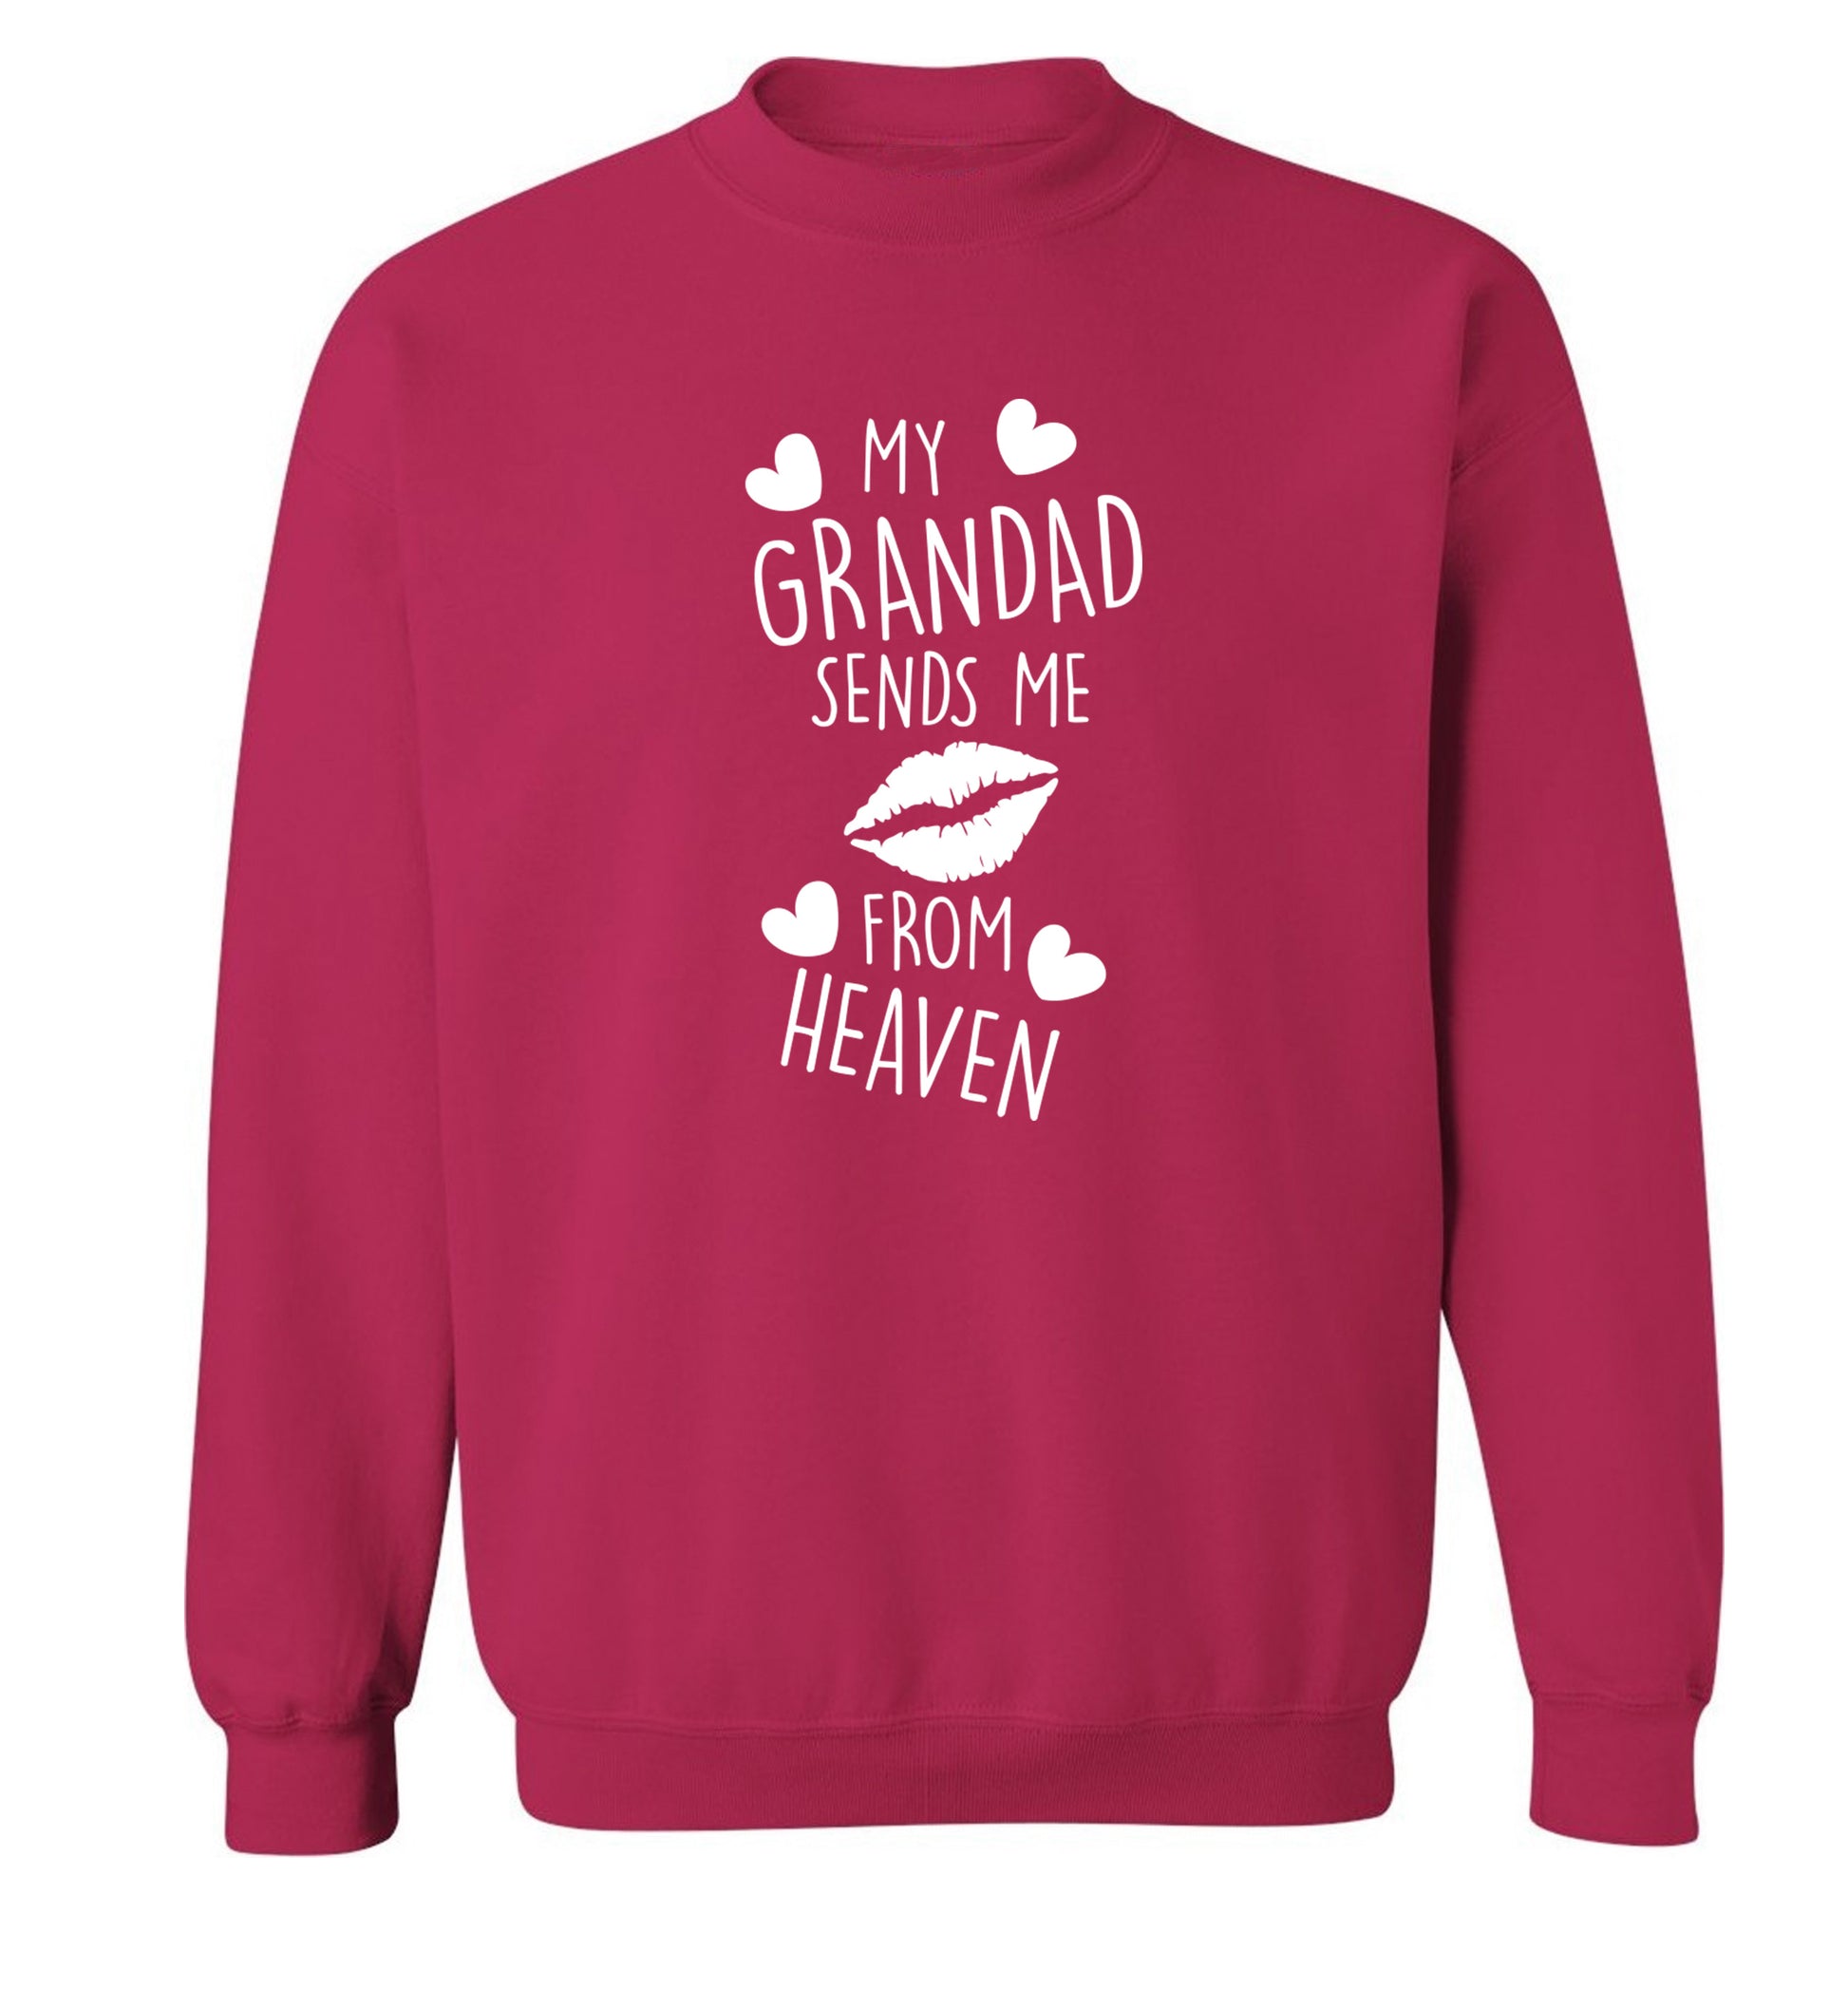 My grandad sends me kisses from heaven Adult's unisex pink Sweater 2XL